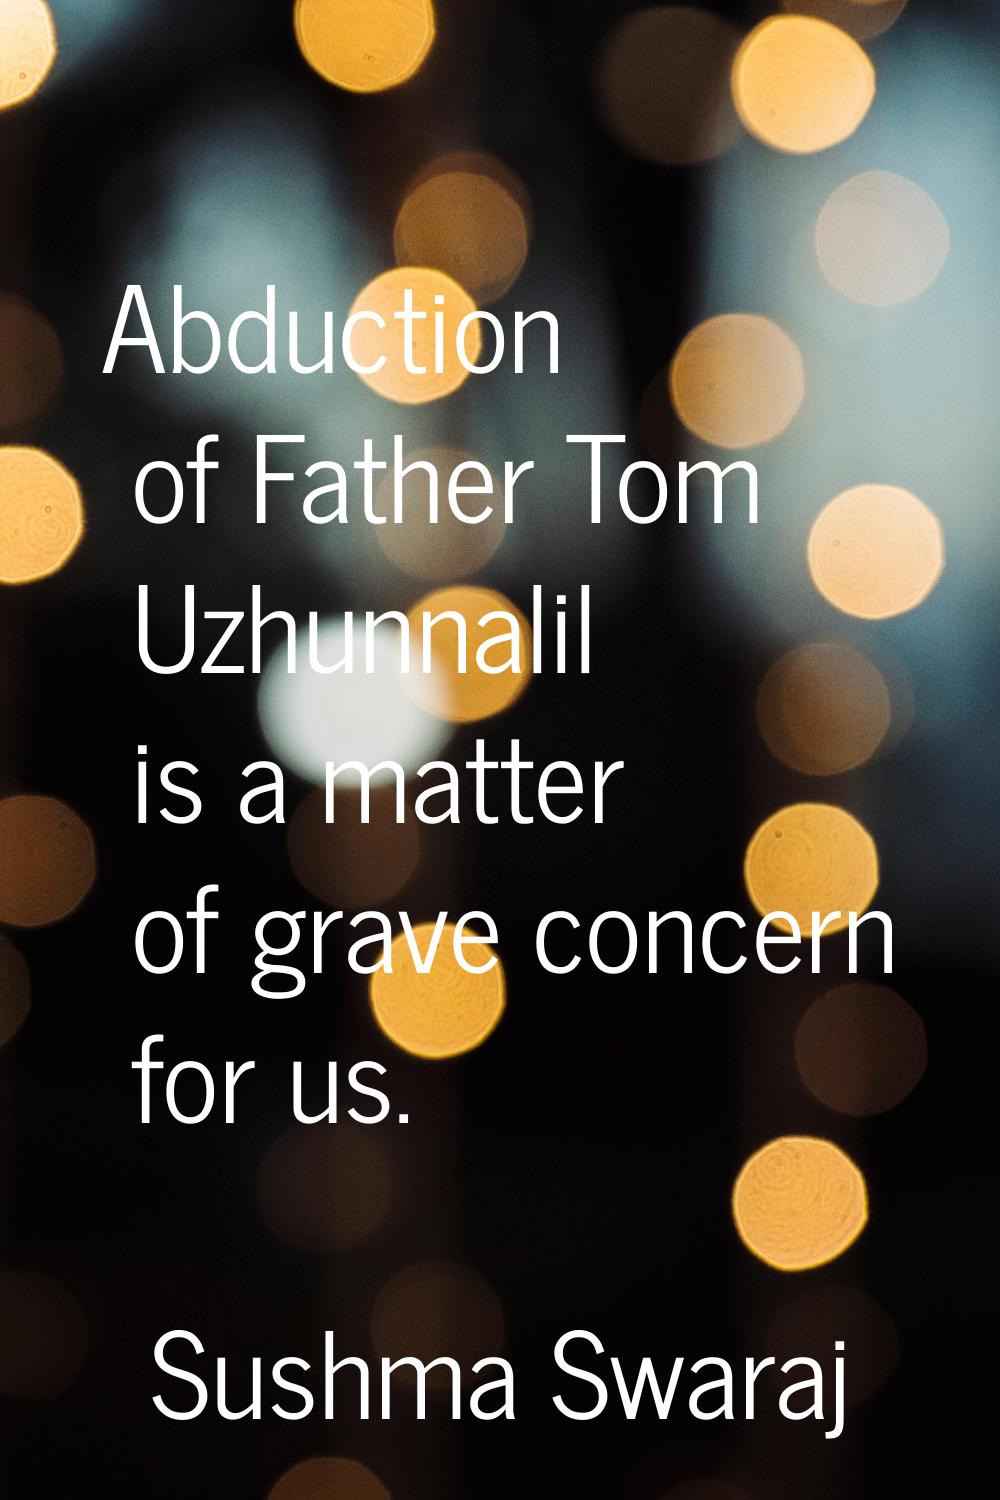 Abduction of Father Tom Uzhunnalil is a matter of grave concern for us.